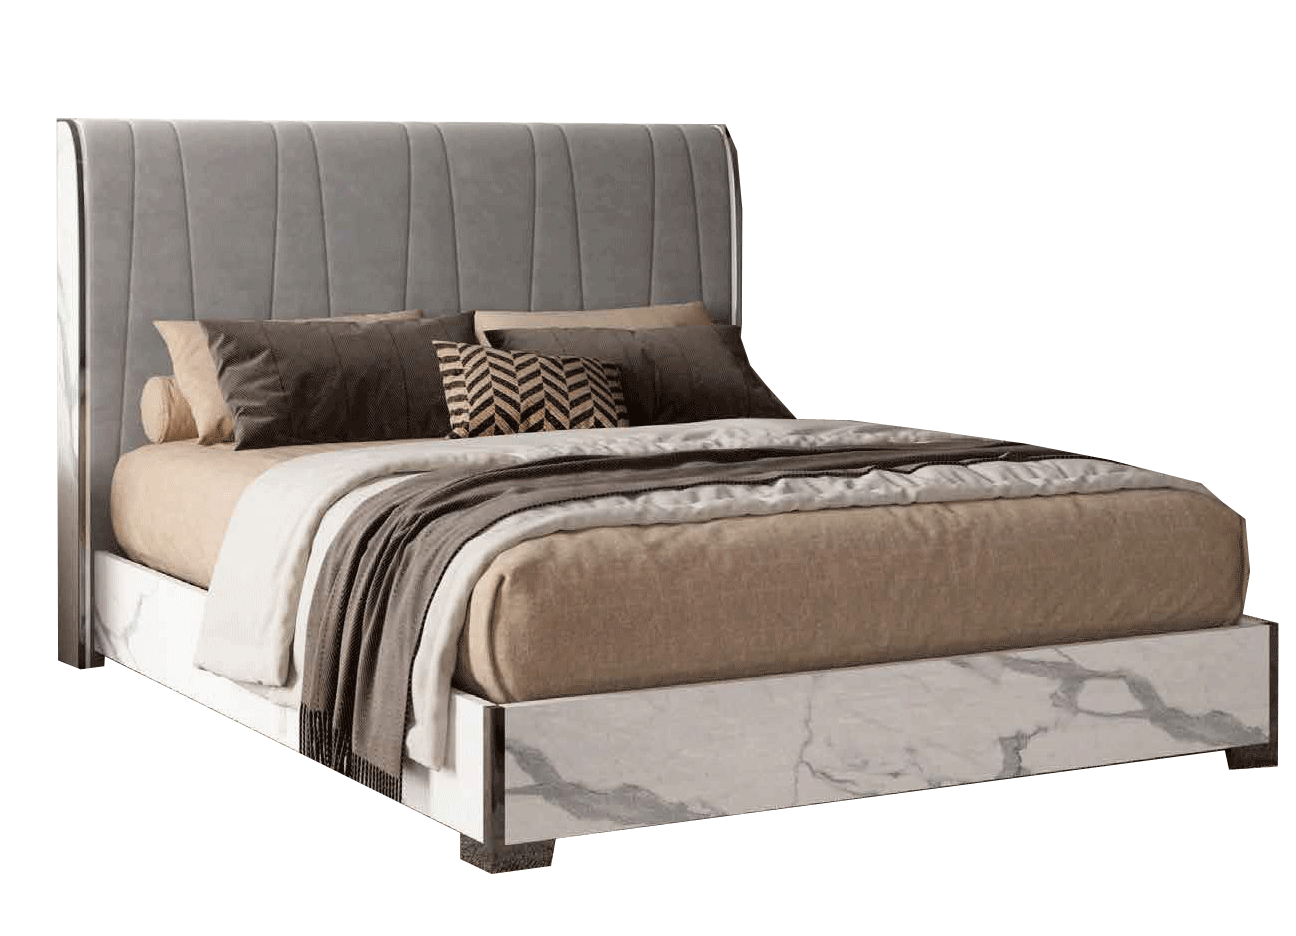 Brands Status Modern Collections, Italy Anna Status Bed